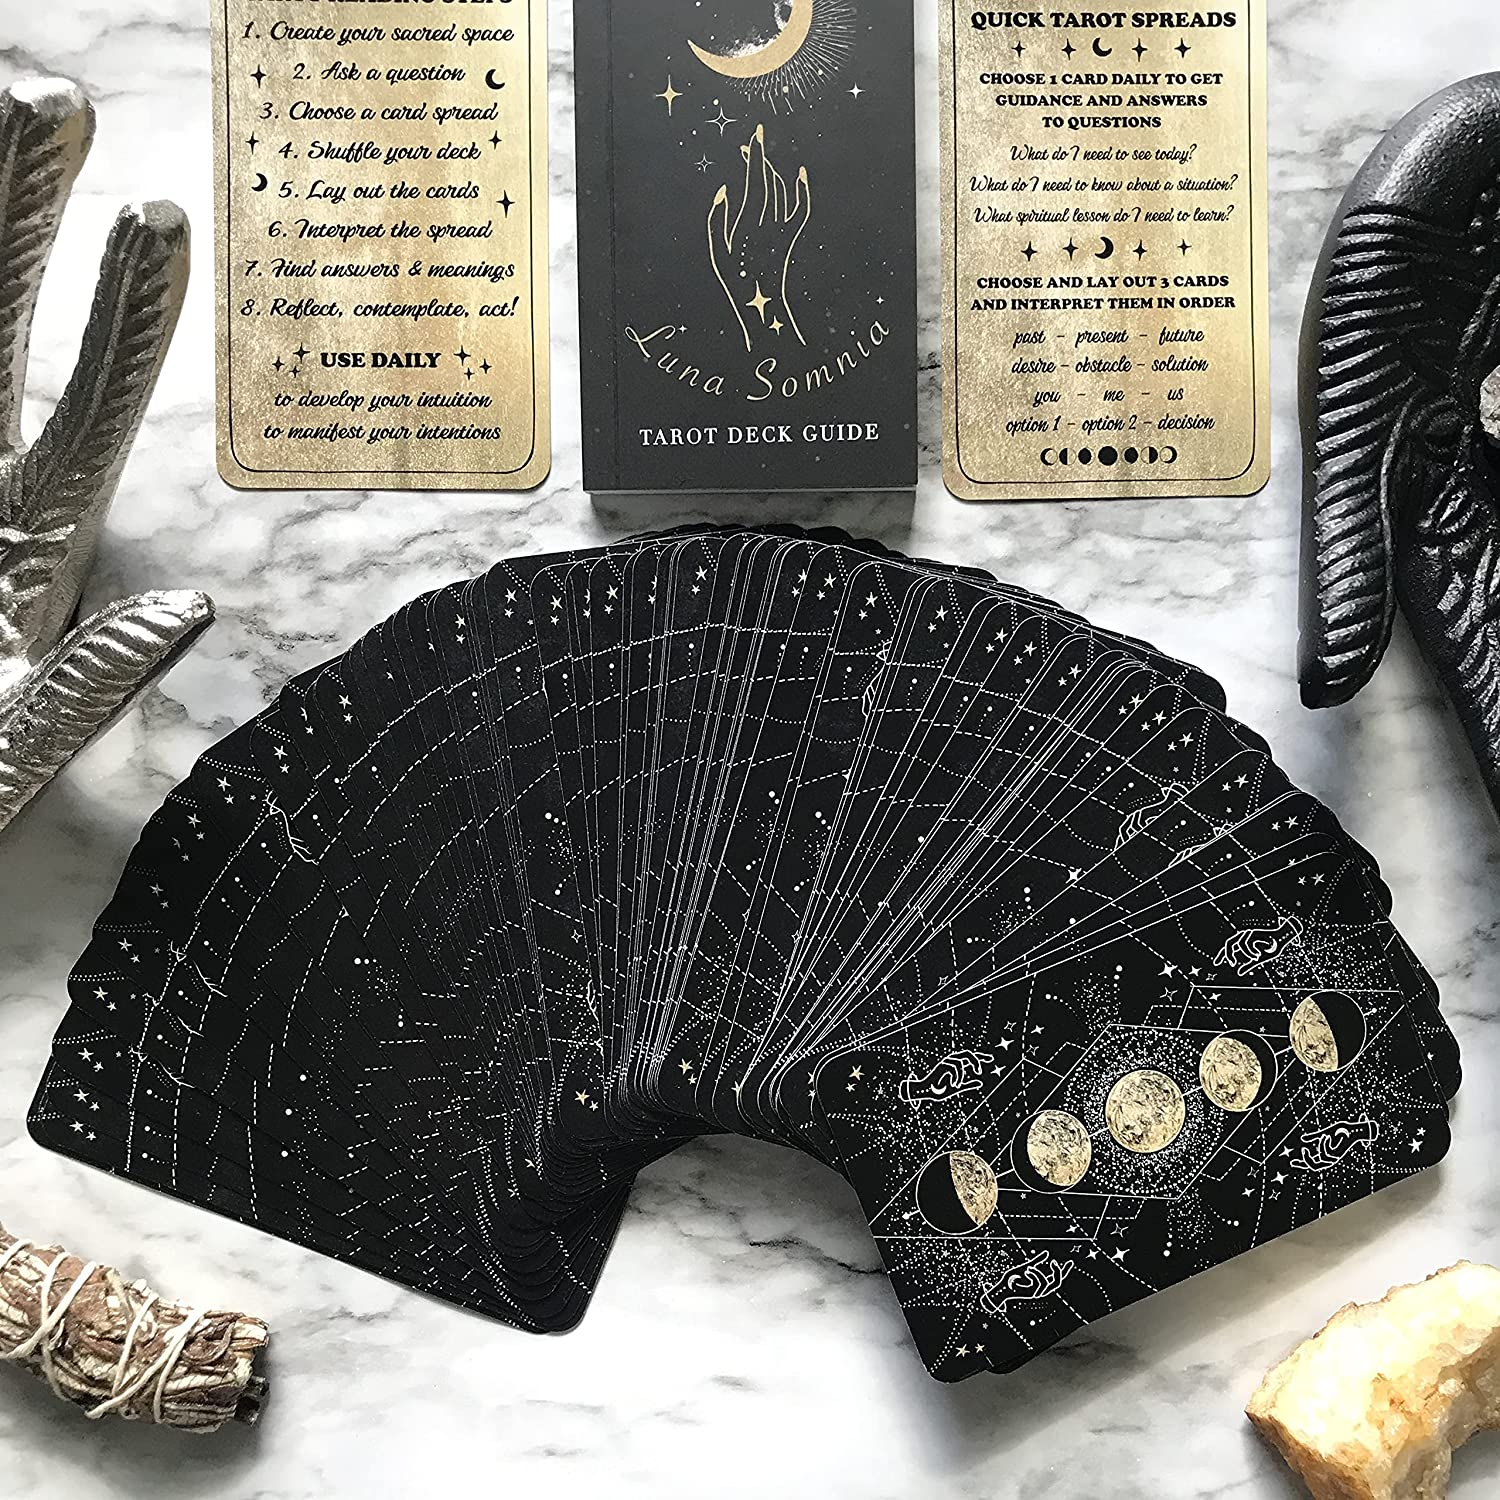 Luna Somnia Tarot Deck with Guidebook & Box - 78 Cards Complete Full Deck - Moon Dreams Starry Celestial Astrology Witchy Black Gold Divination Tool (2nd)